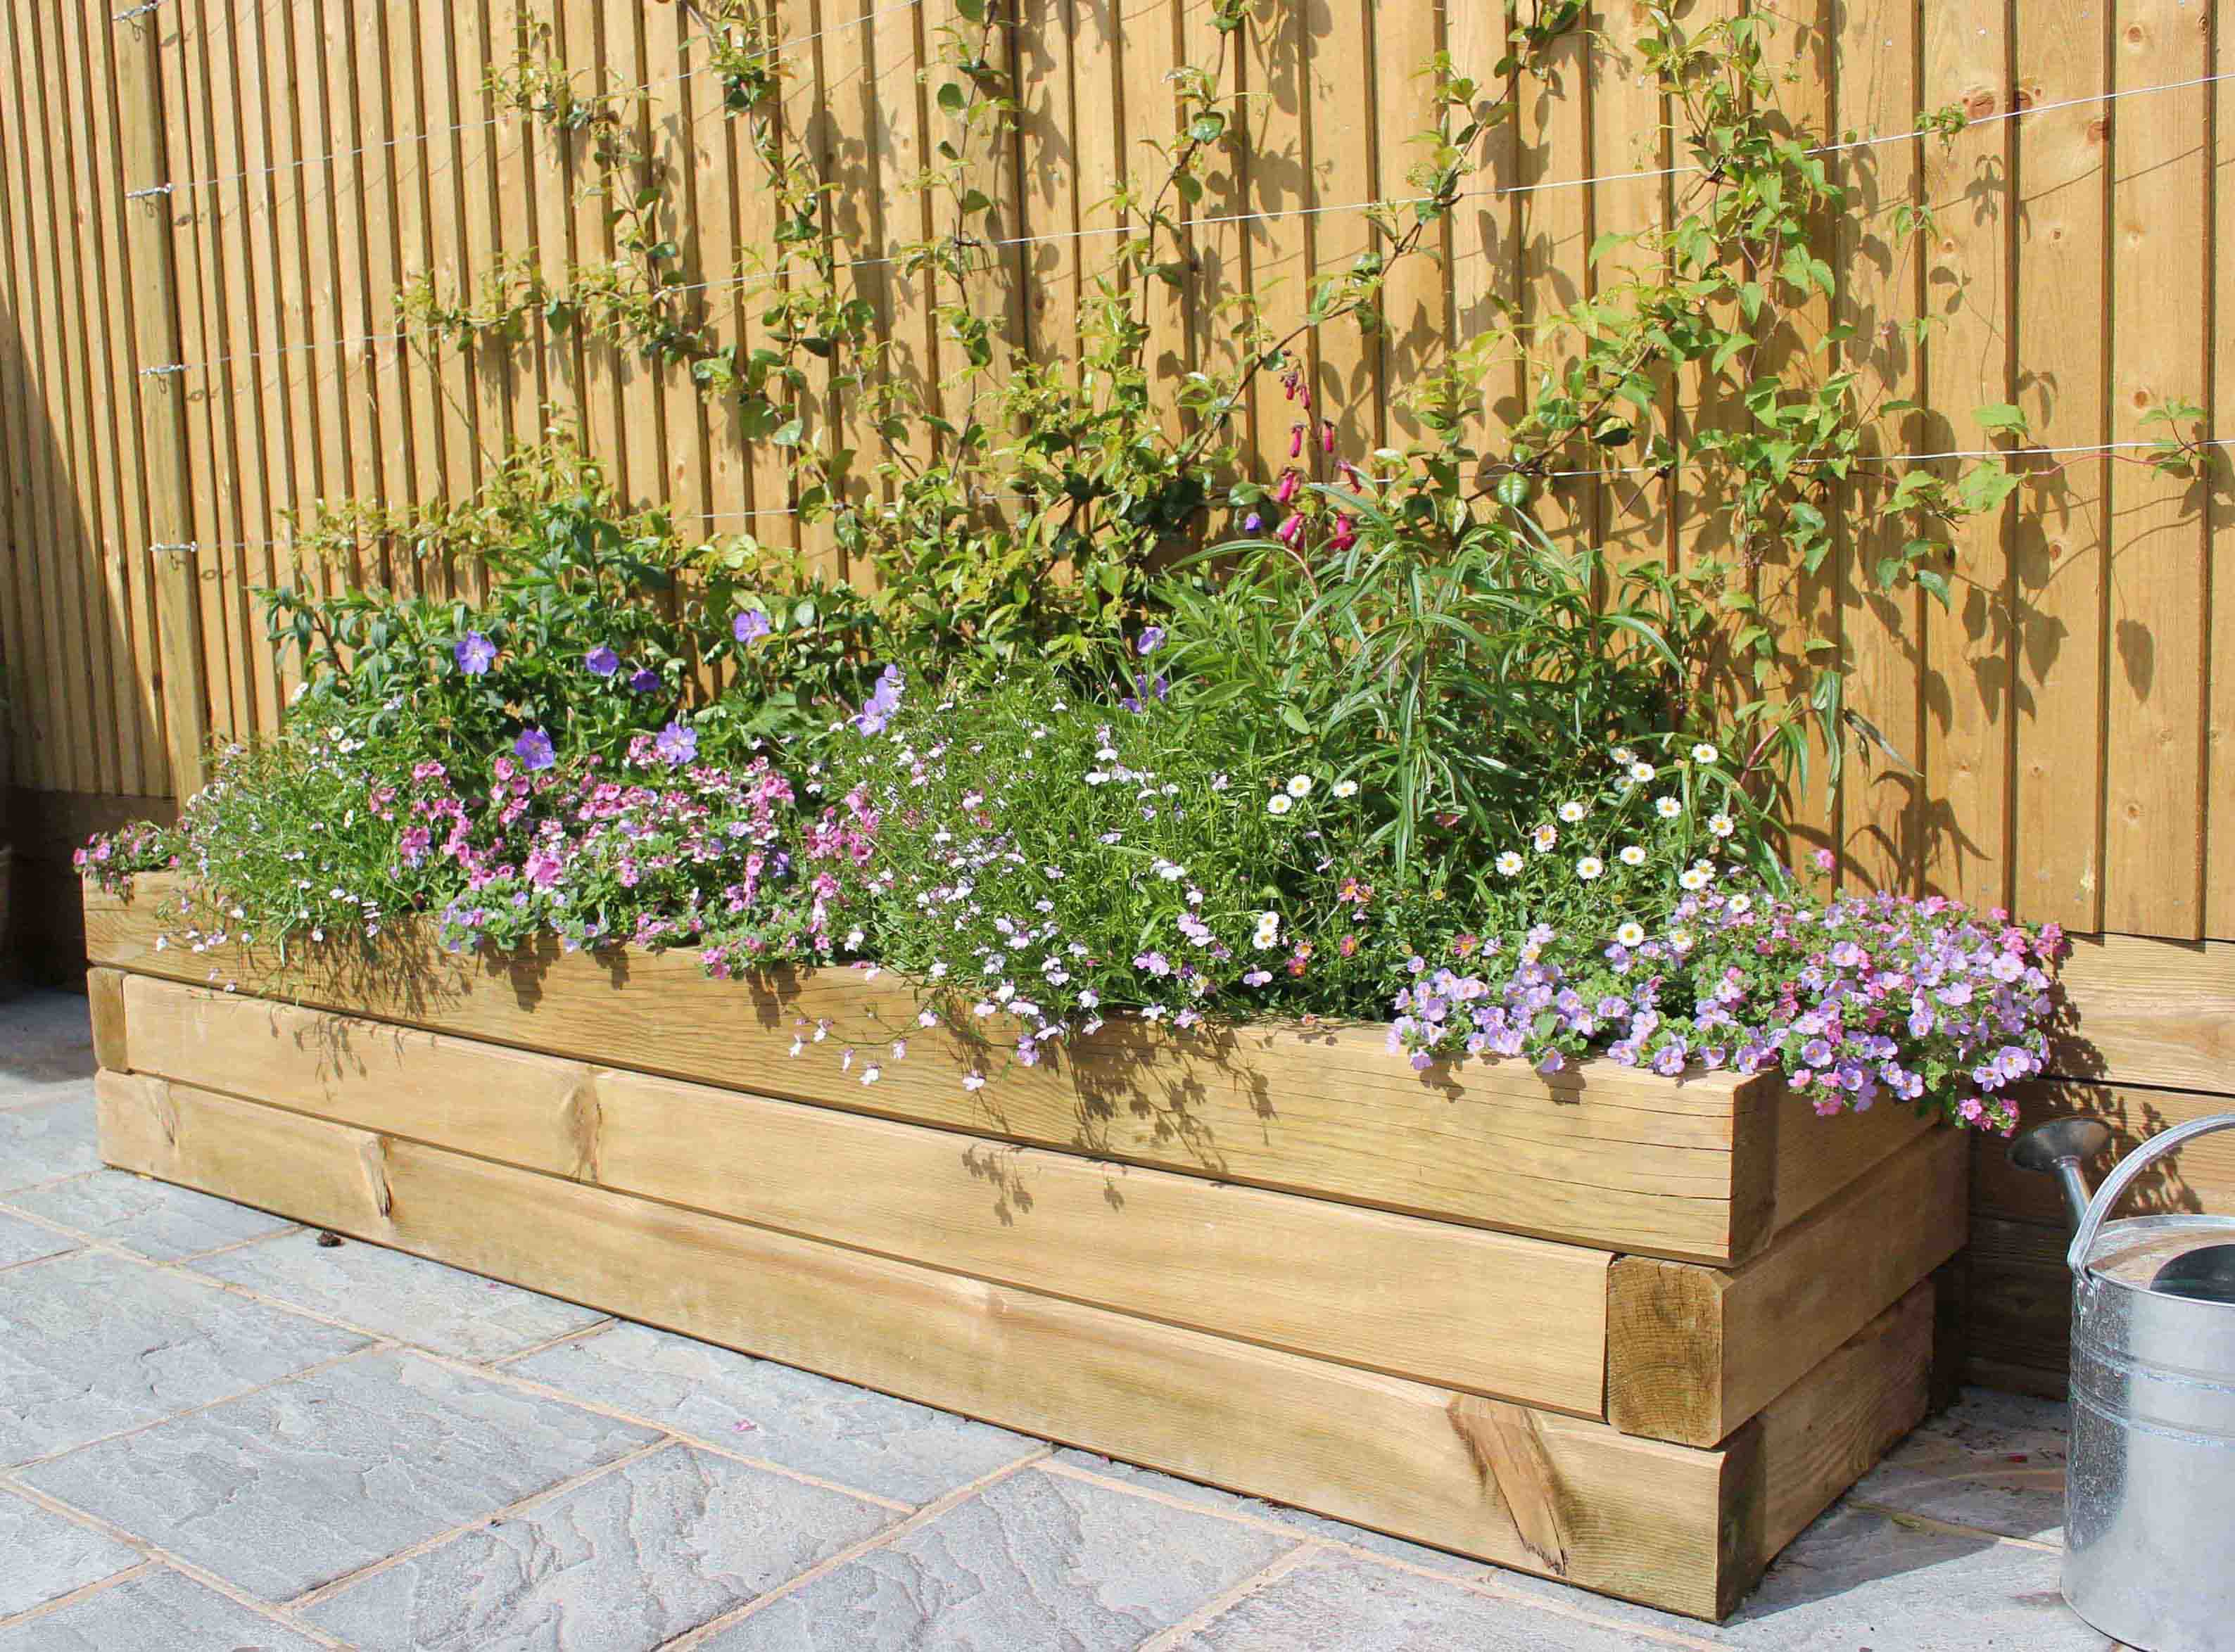 How To Build A Raised Garden Bed With Sleepers ...